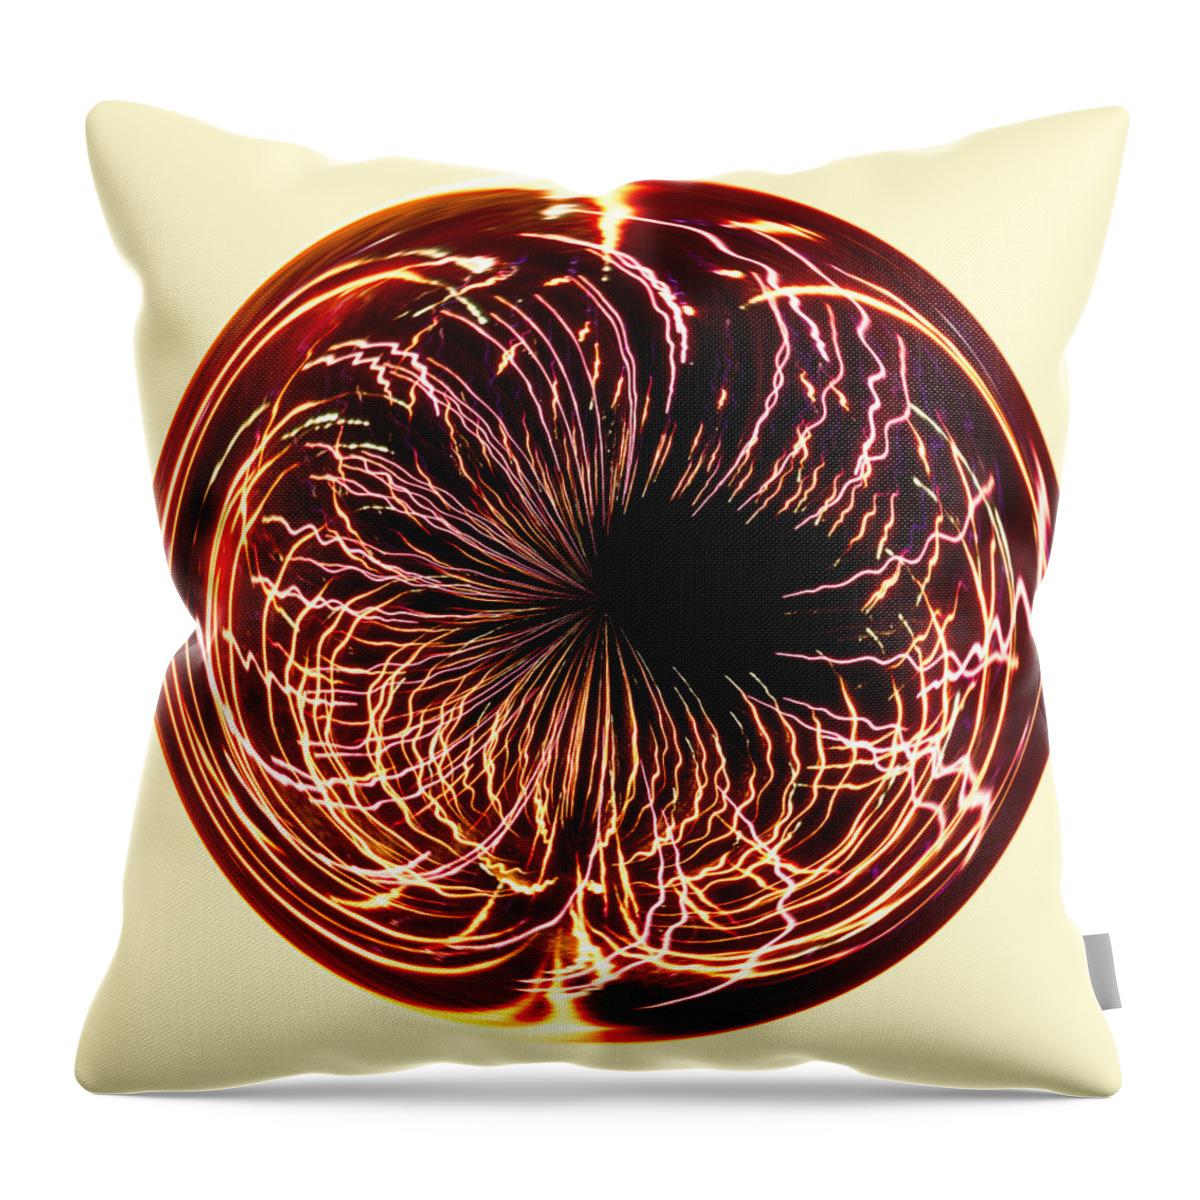 Fireworks Throw Pillow featuring the photograph Fireworks Orb by Bill Barber